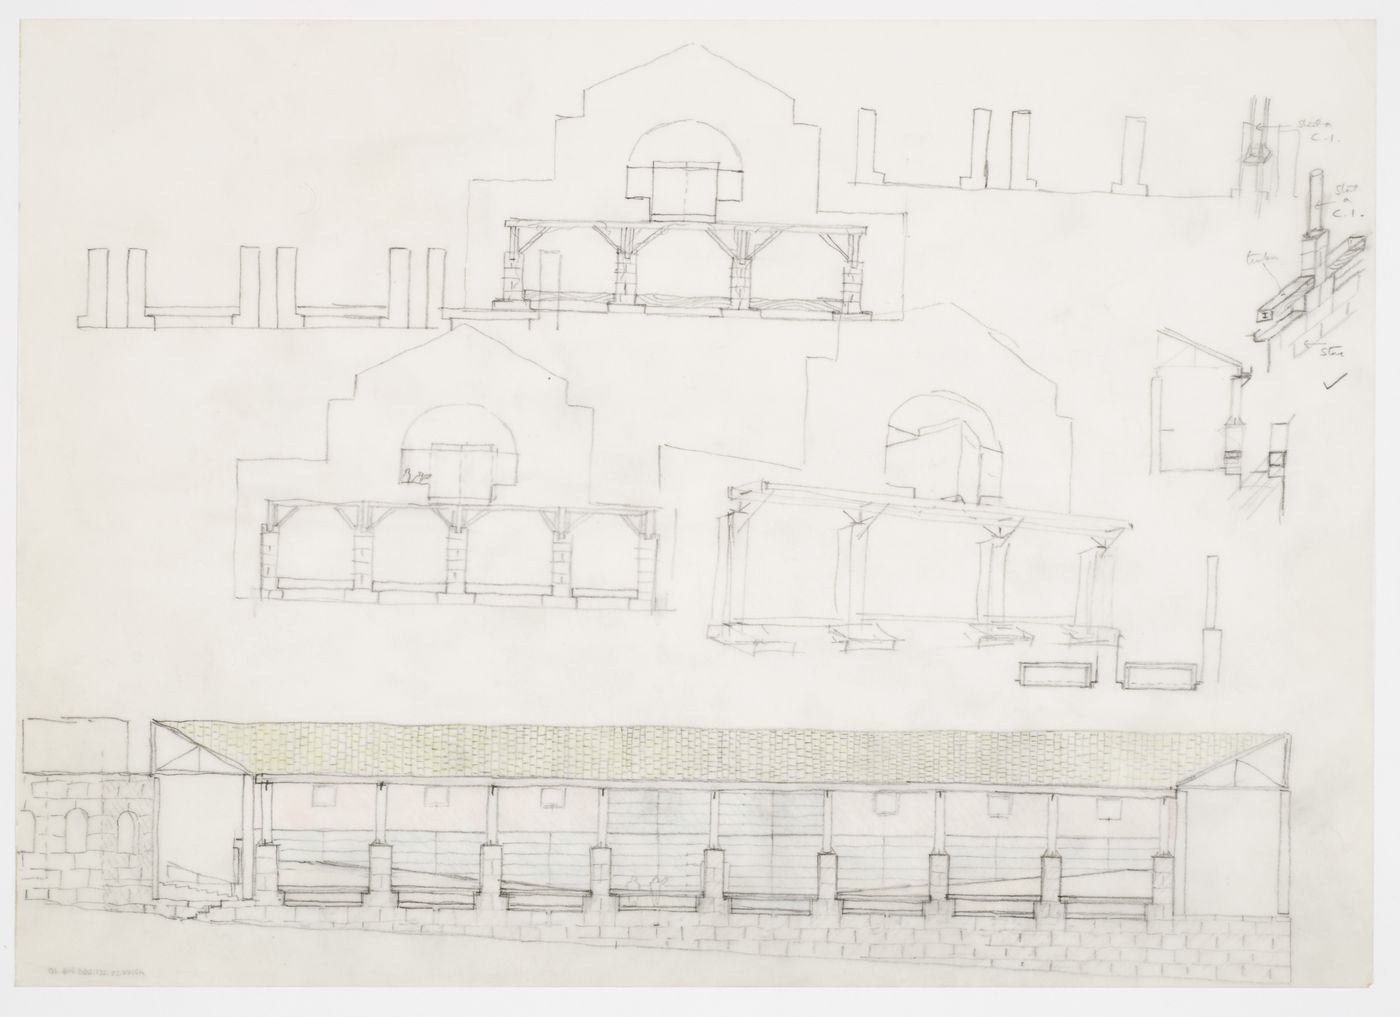 Center for Theatre Arts, Cornell University, Ithaca, New York: elevations and details